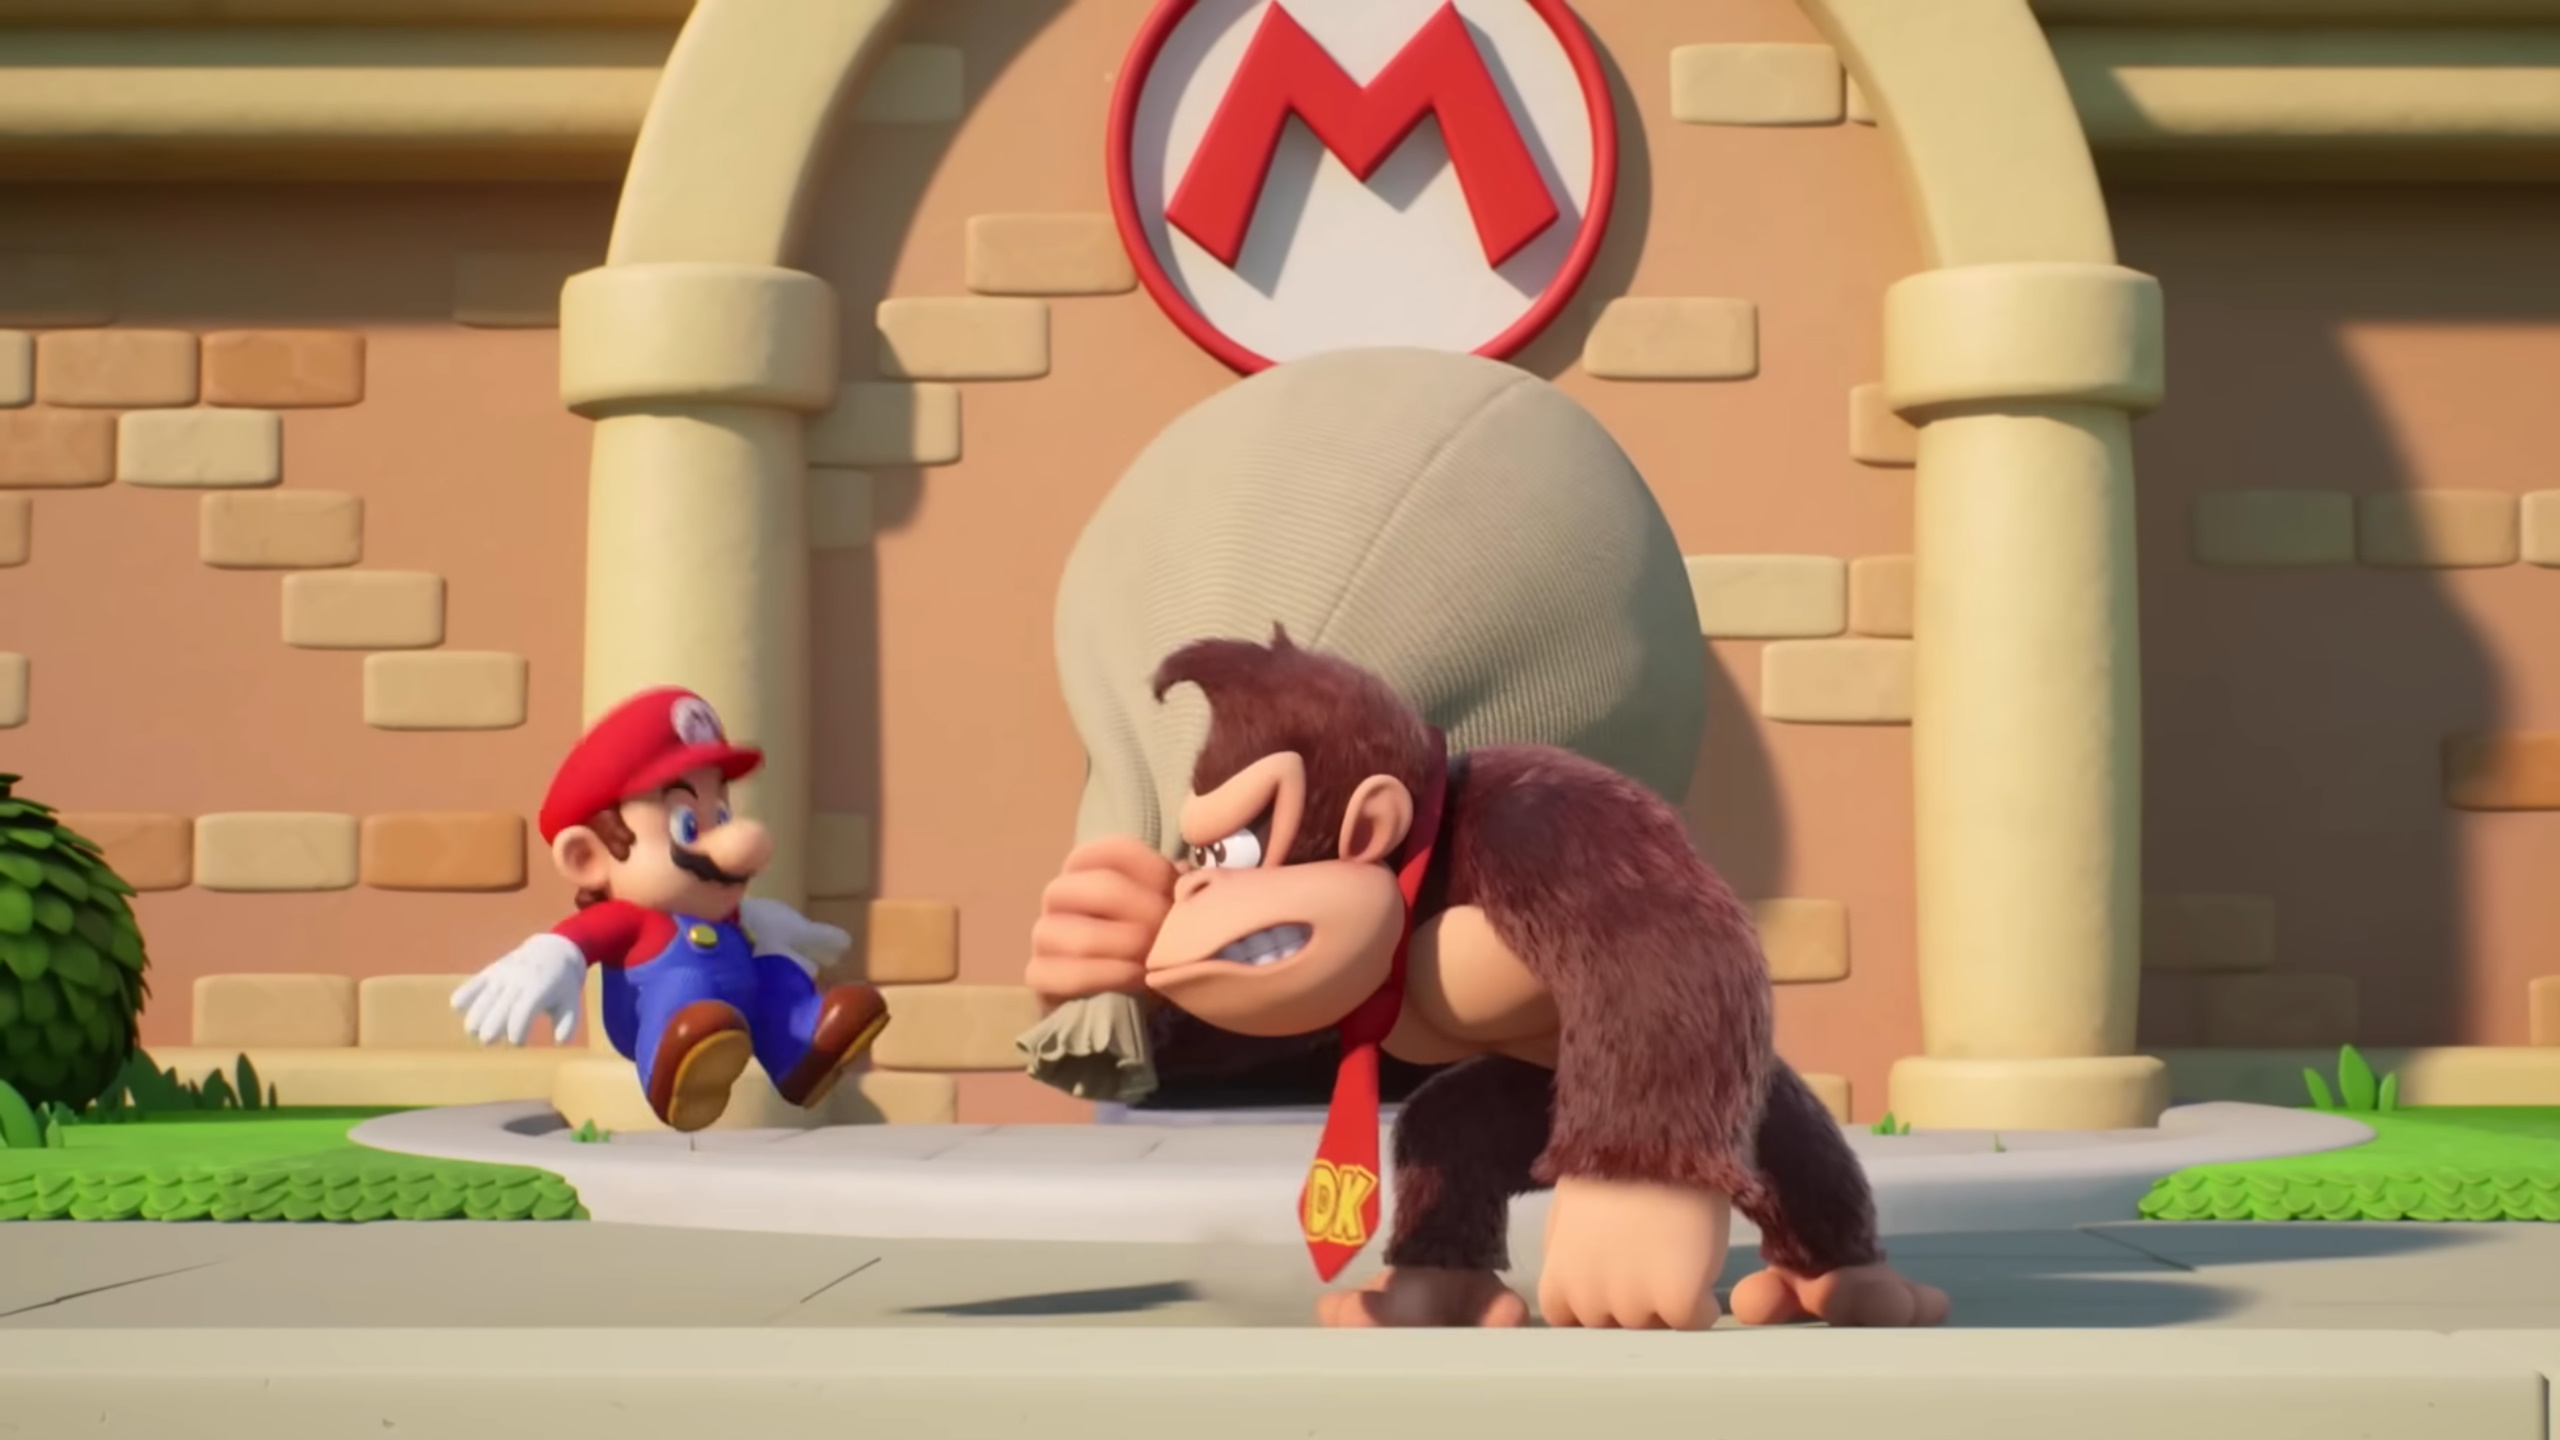 Mario vs Donkey Kong release date, Pre-order info and latest news